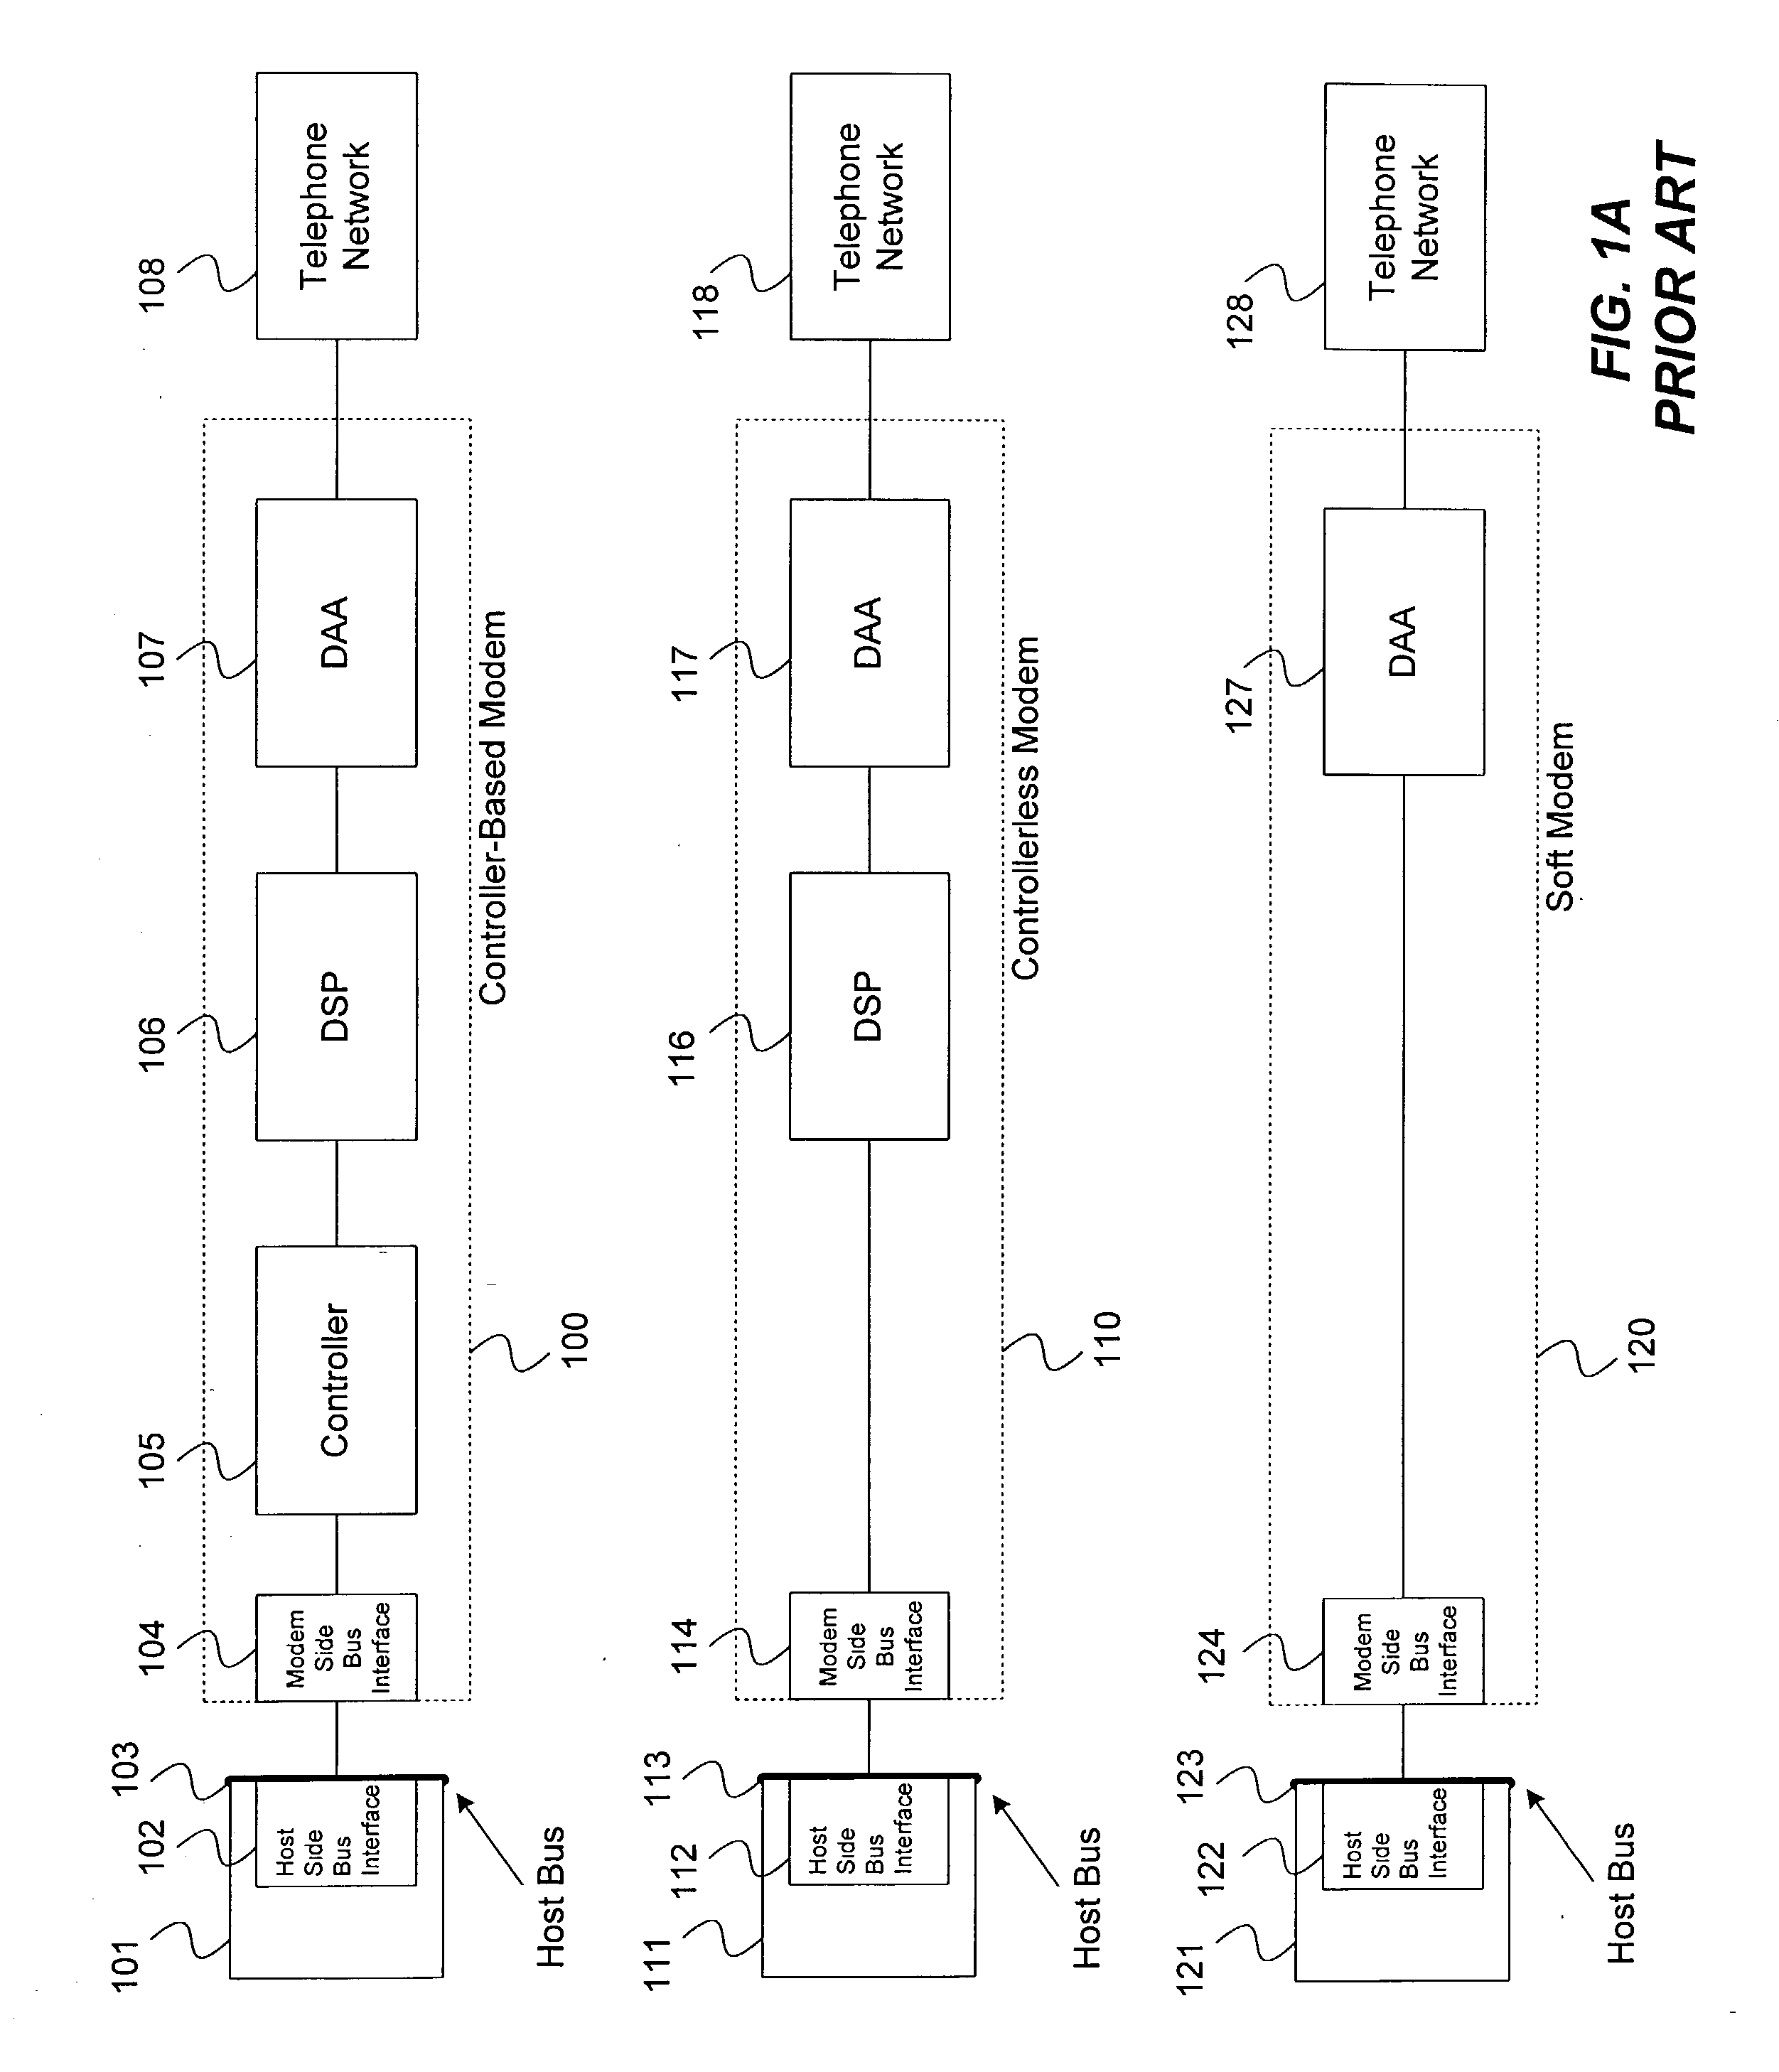 Digital isolation barrier as interface bus for modems